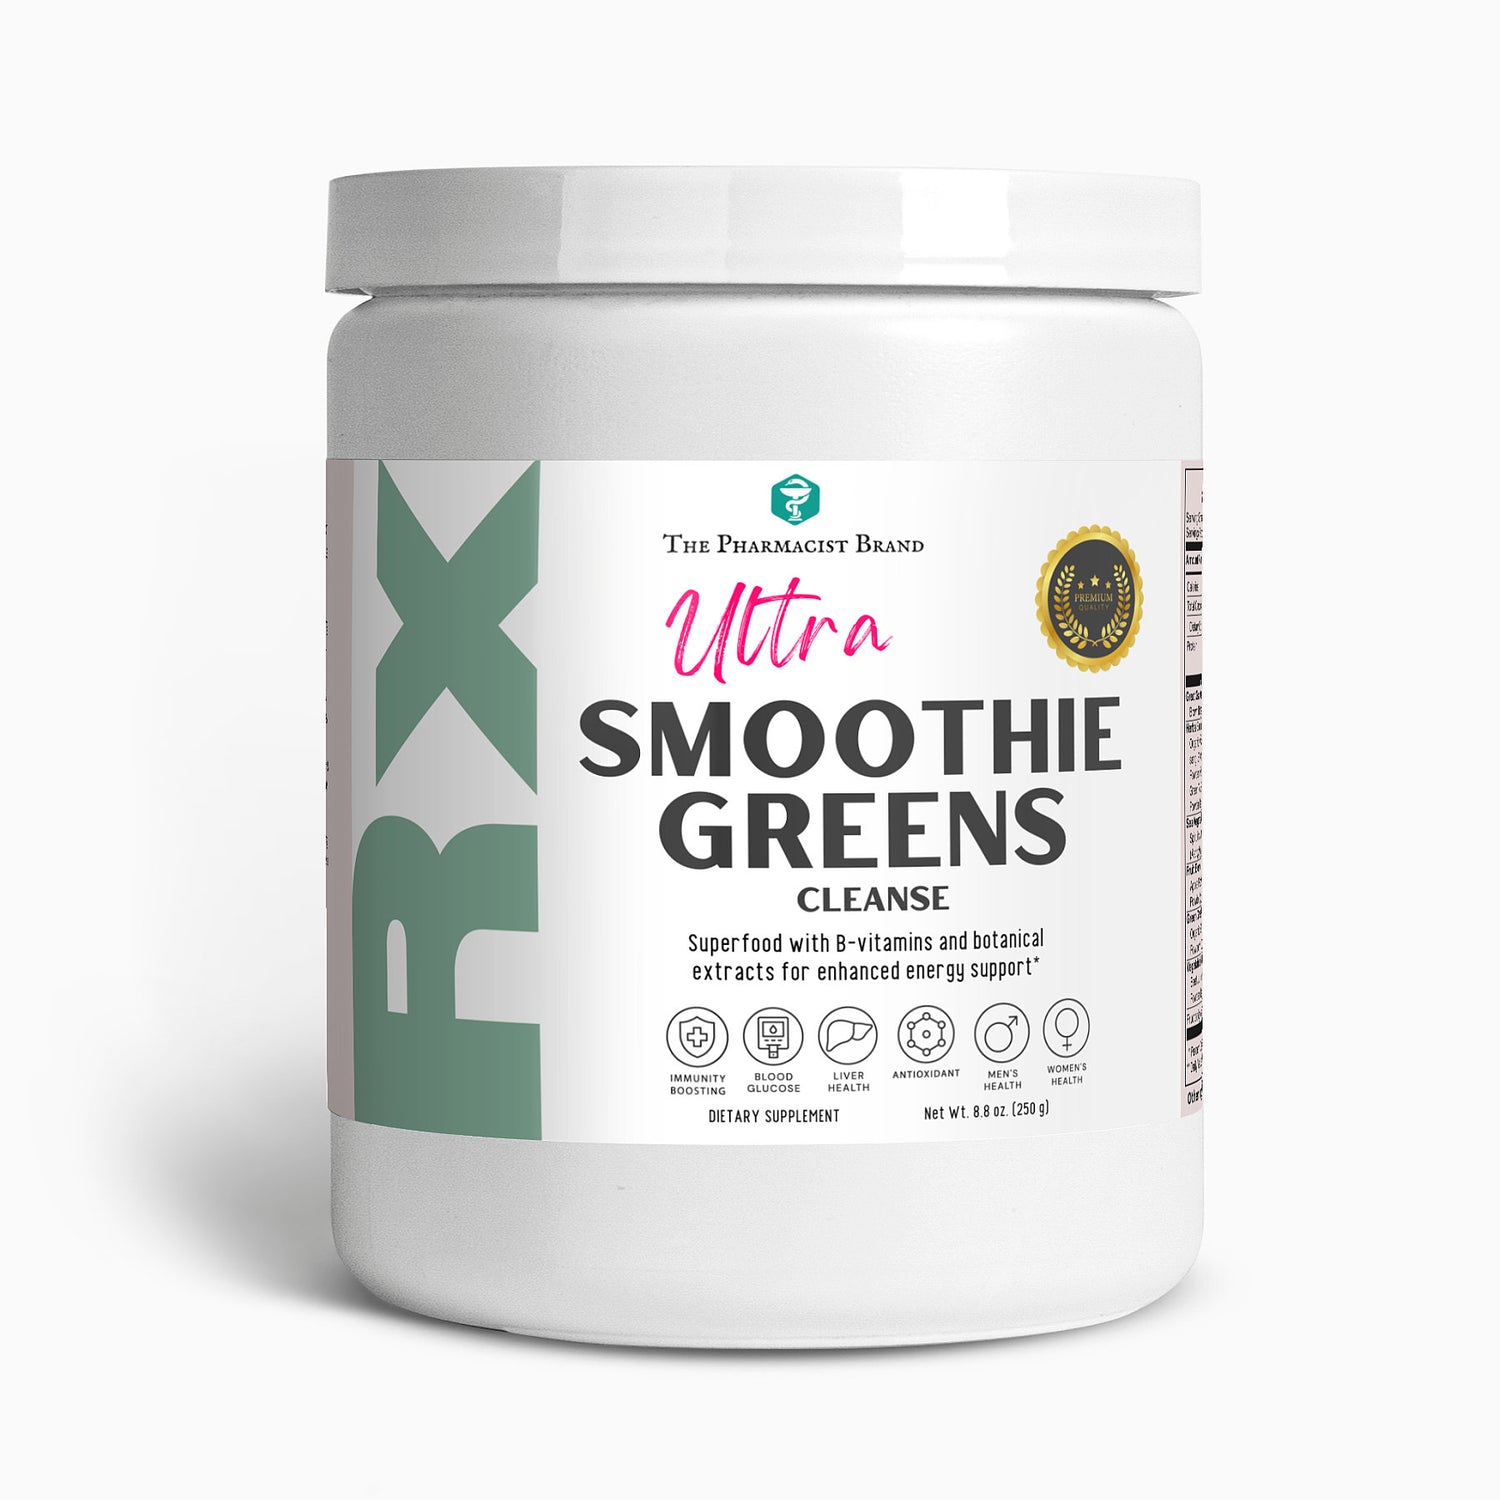 Ultra Smoothie Greens Cleanse